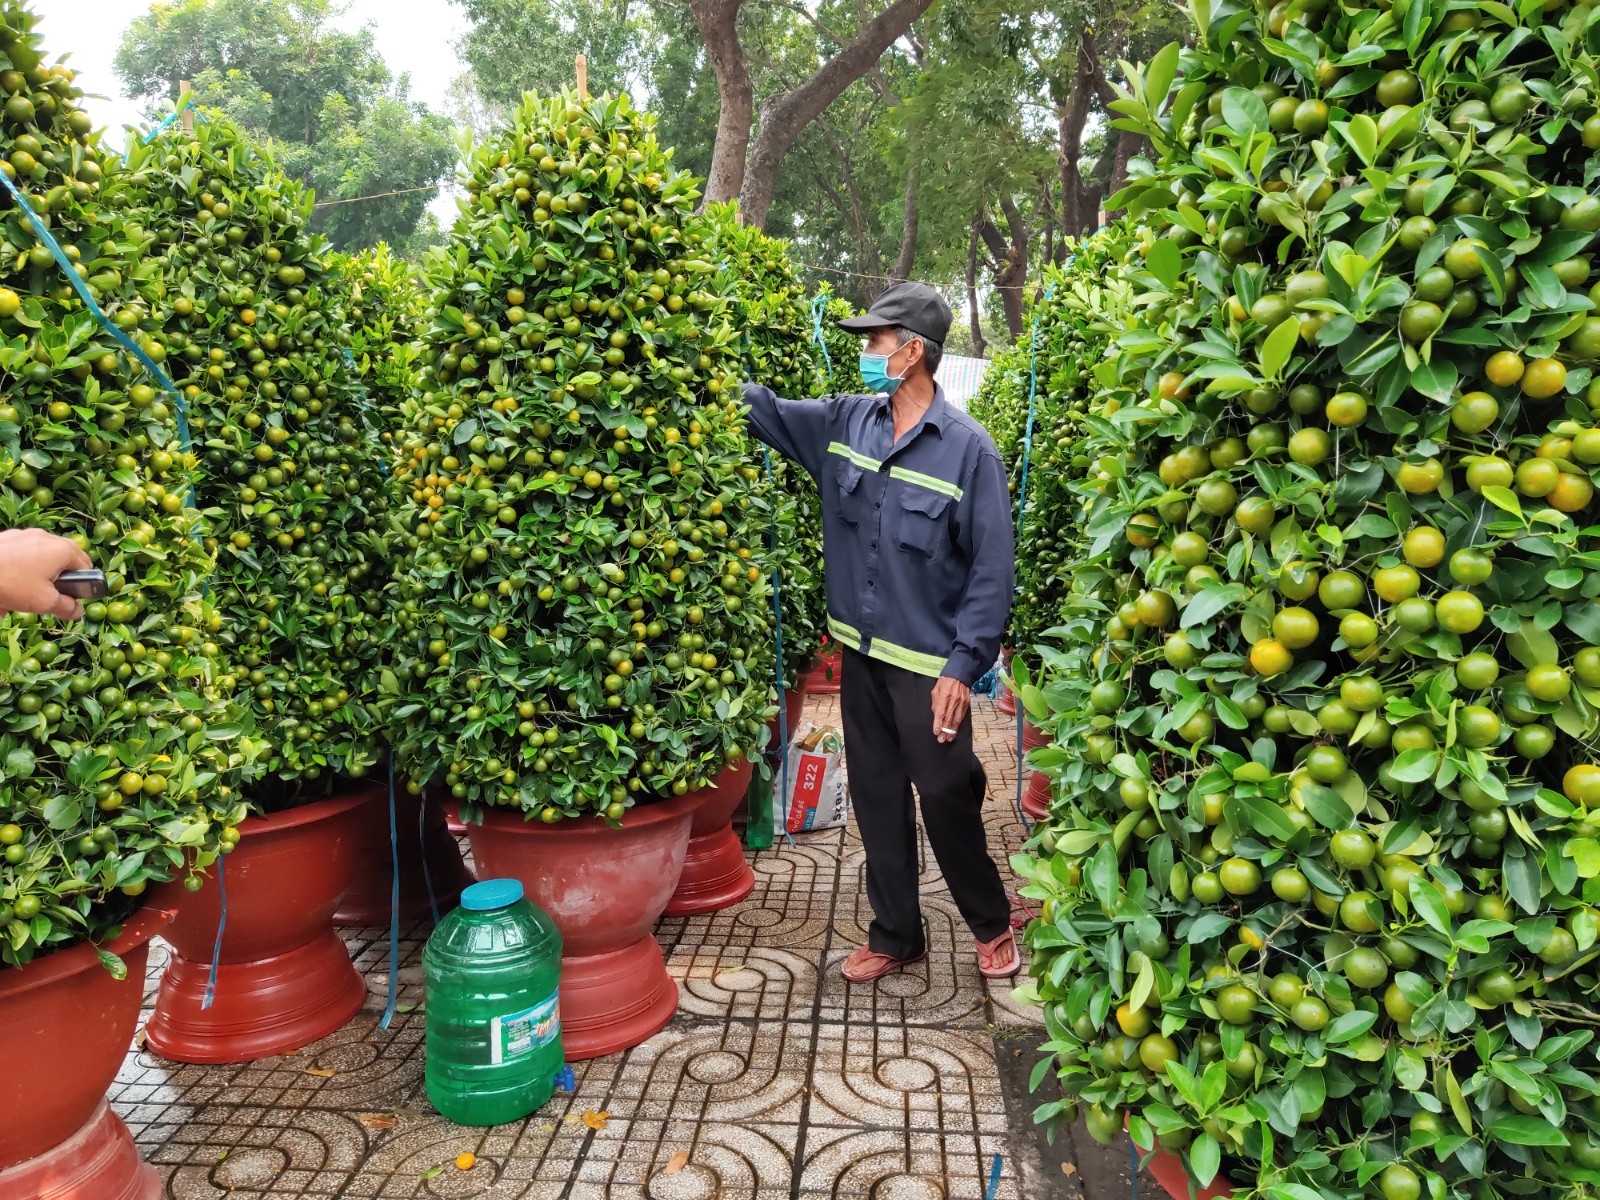 Kumquat trees are sold at Gia Dinh Park in Go Vap District, Ho Chi Minh City. Photo: N.Tri / Tuoi Tre